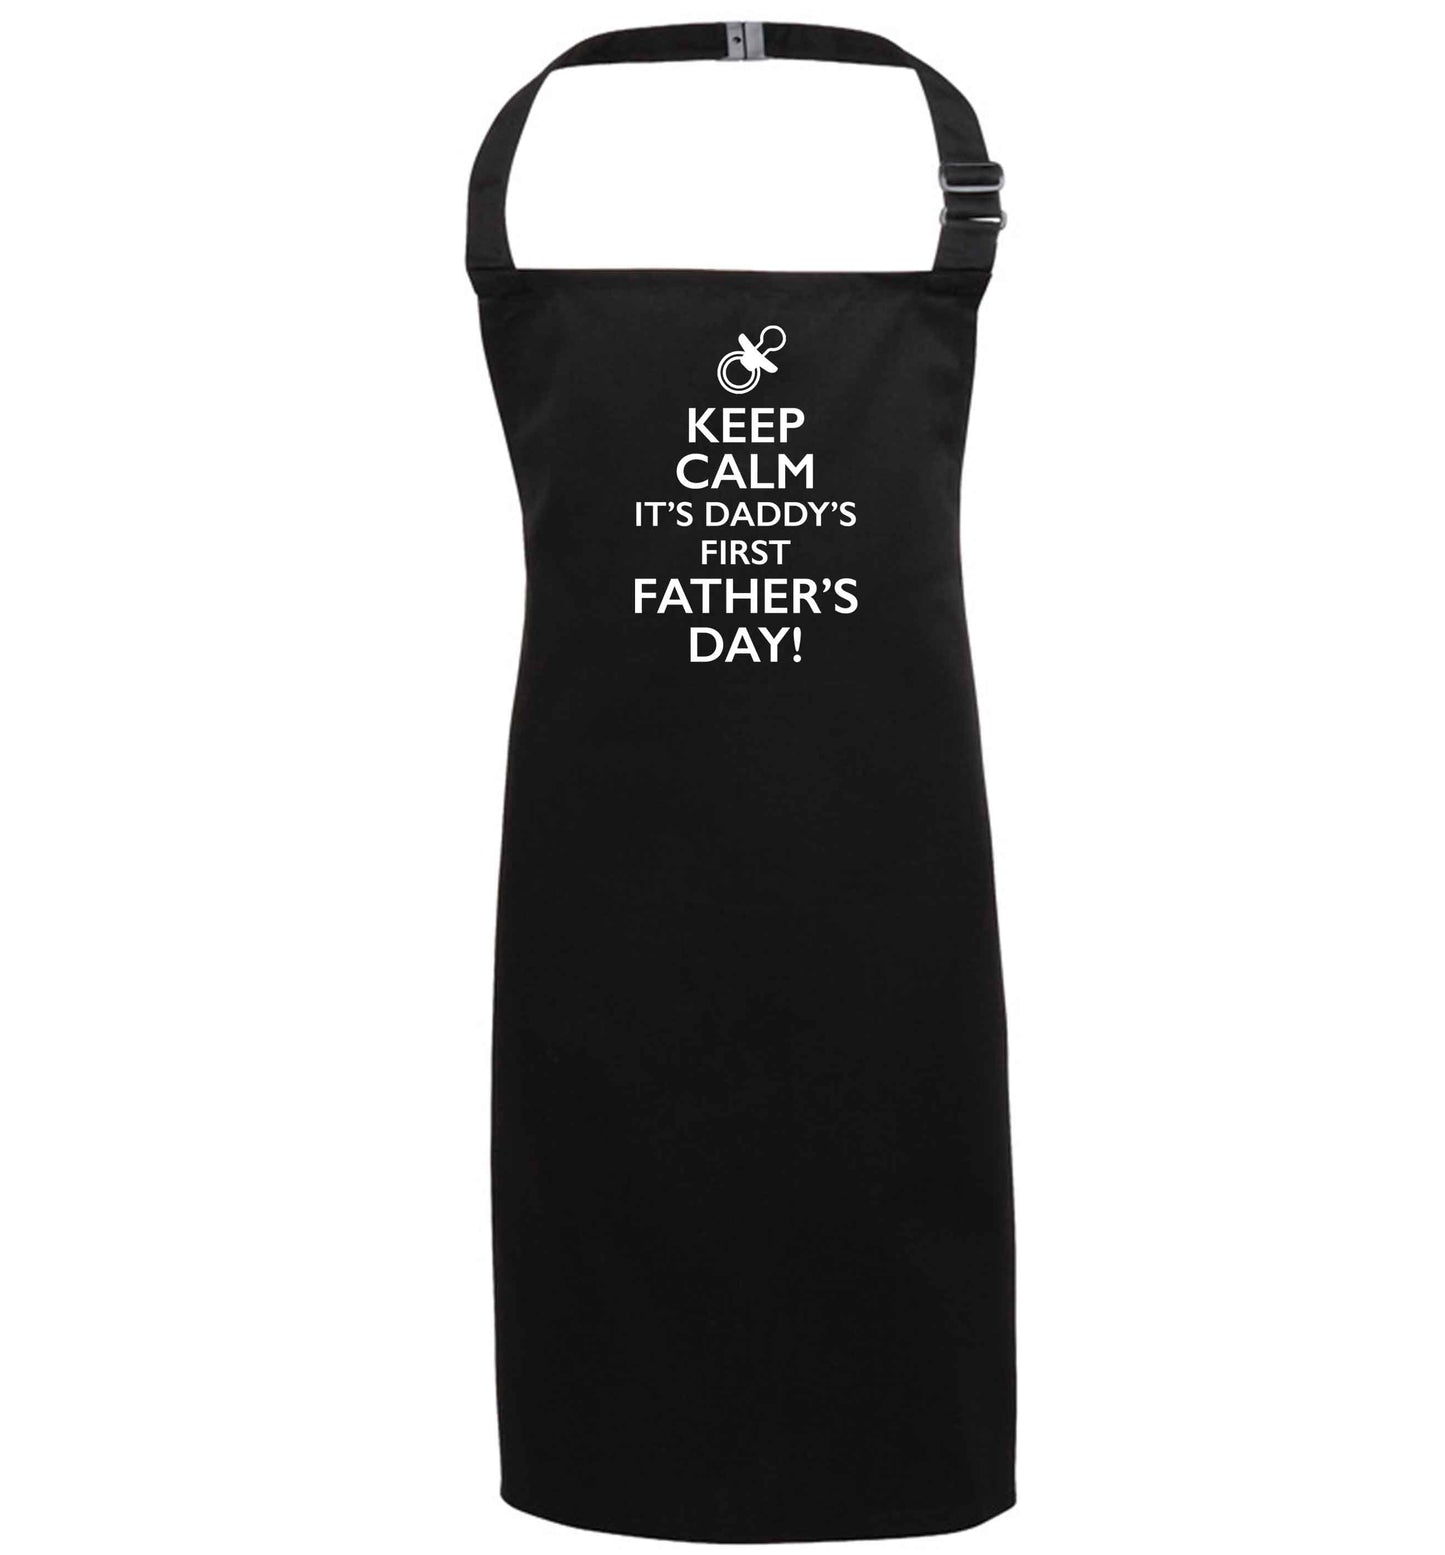 Keep calm it's daddys first father's day black apron 7-10 years